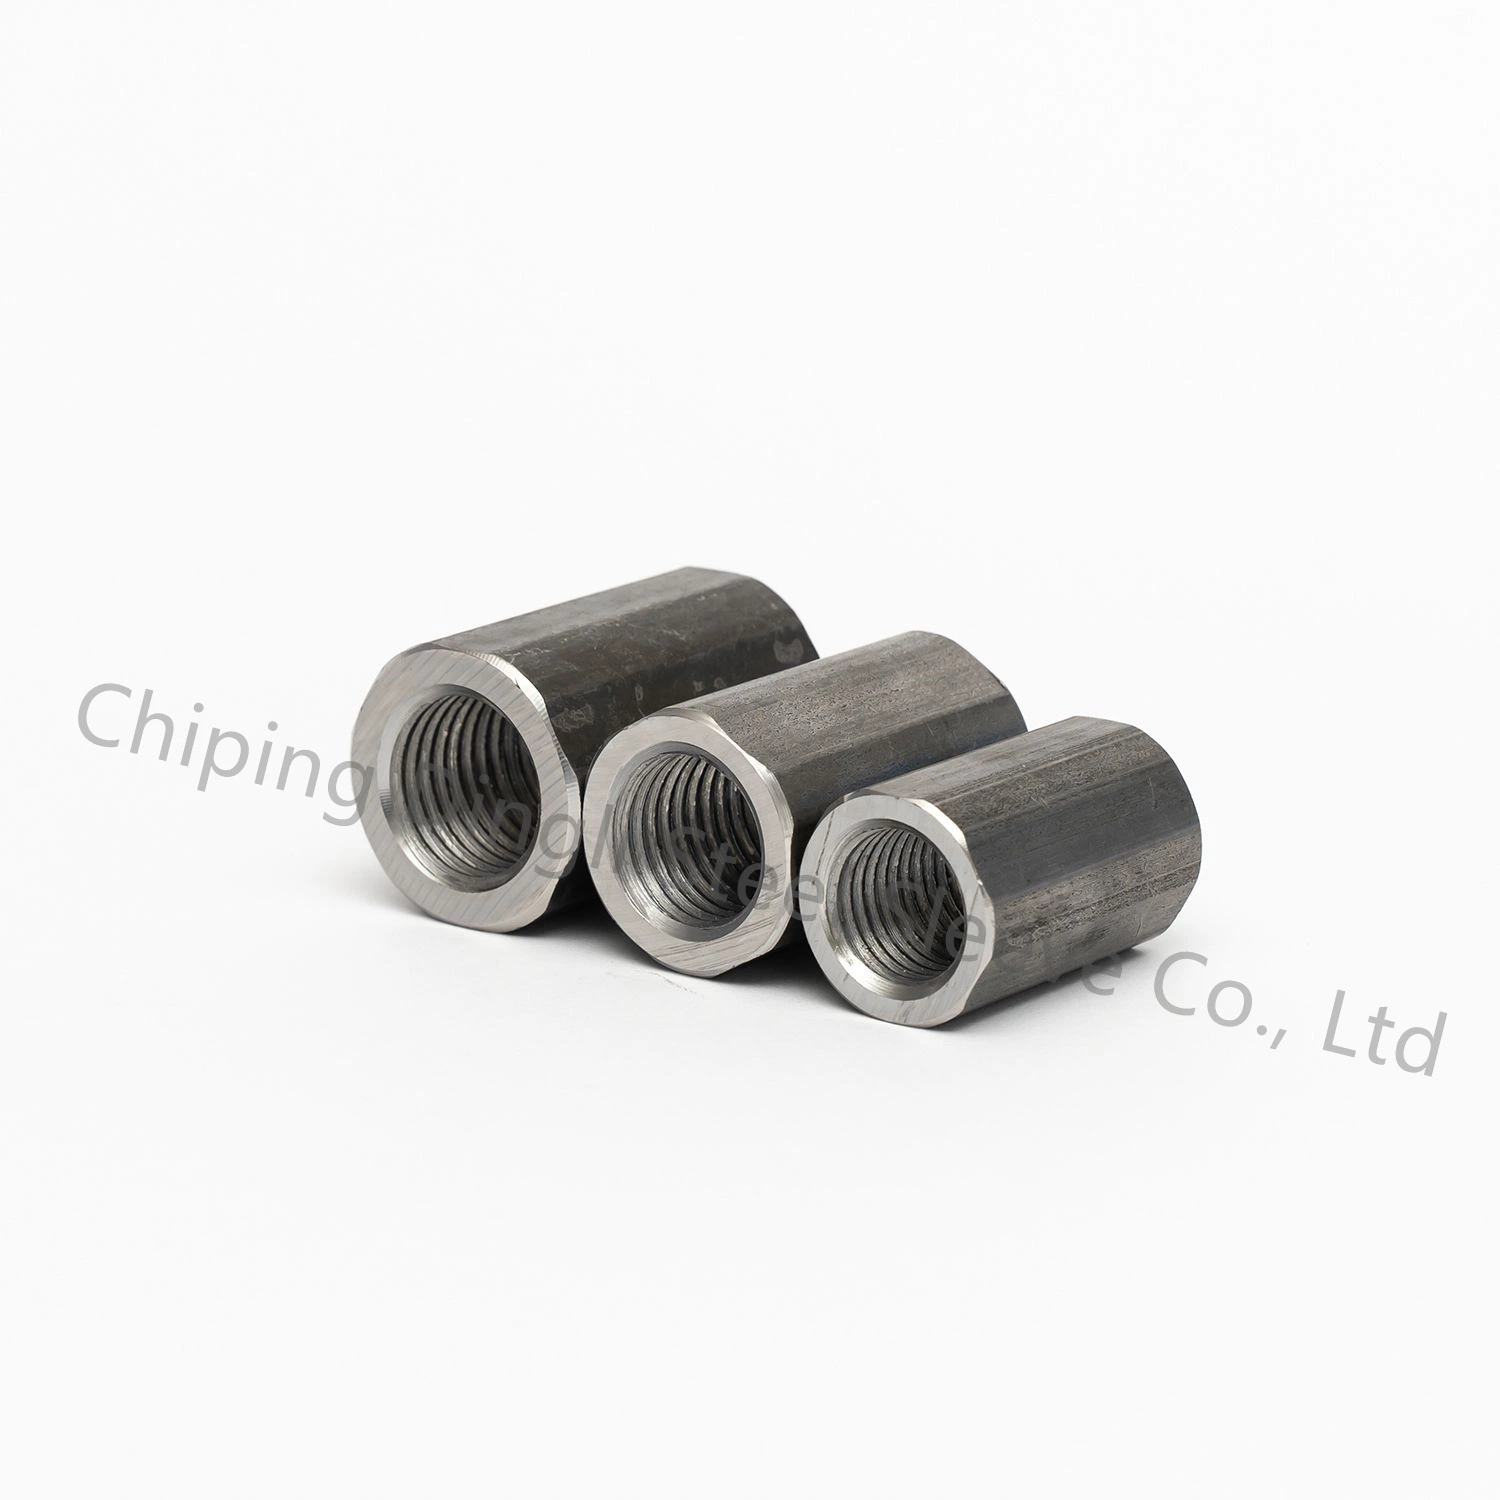 Masonry Construction Tube and Fittings Steel Tubular Scaffolding/Scaffold Drop Forged Fixed and Final Hexagonal Coupler Threaded Rebar Mechanical Connector Coup